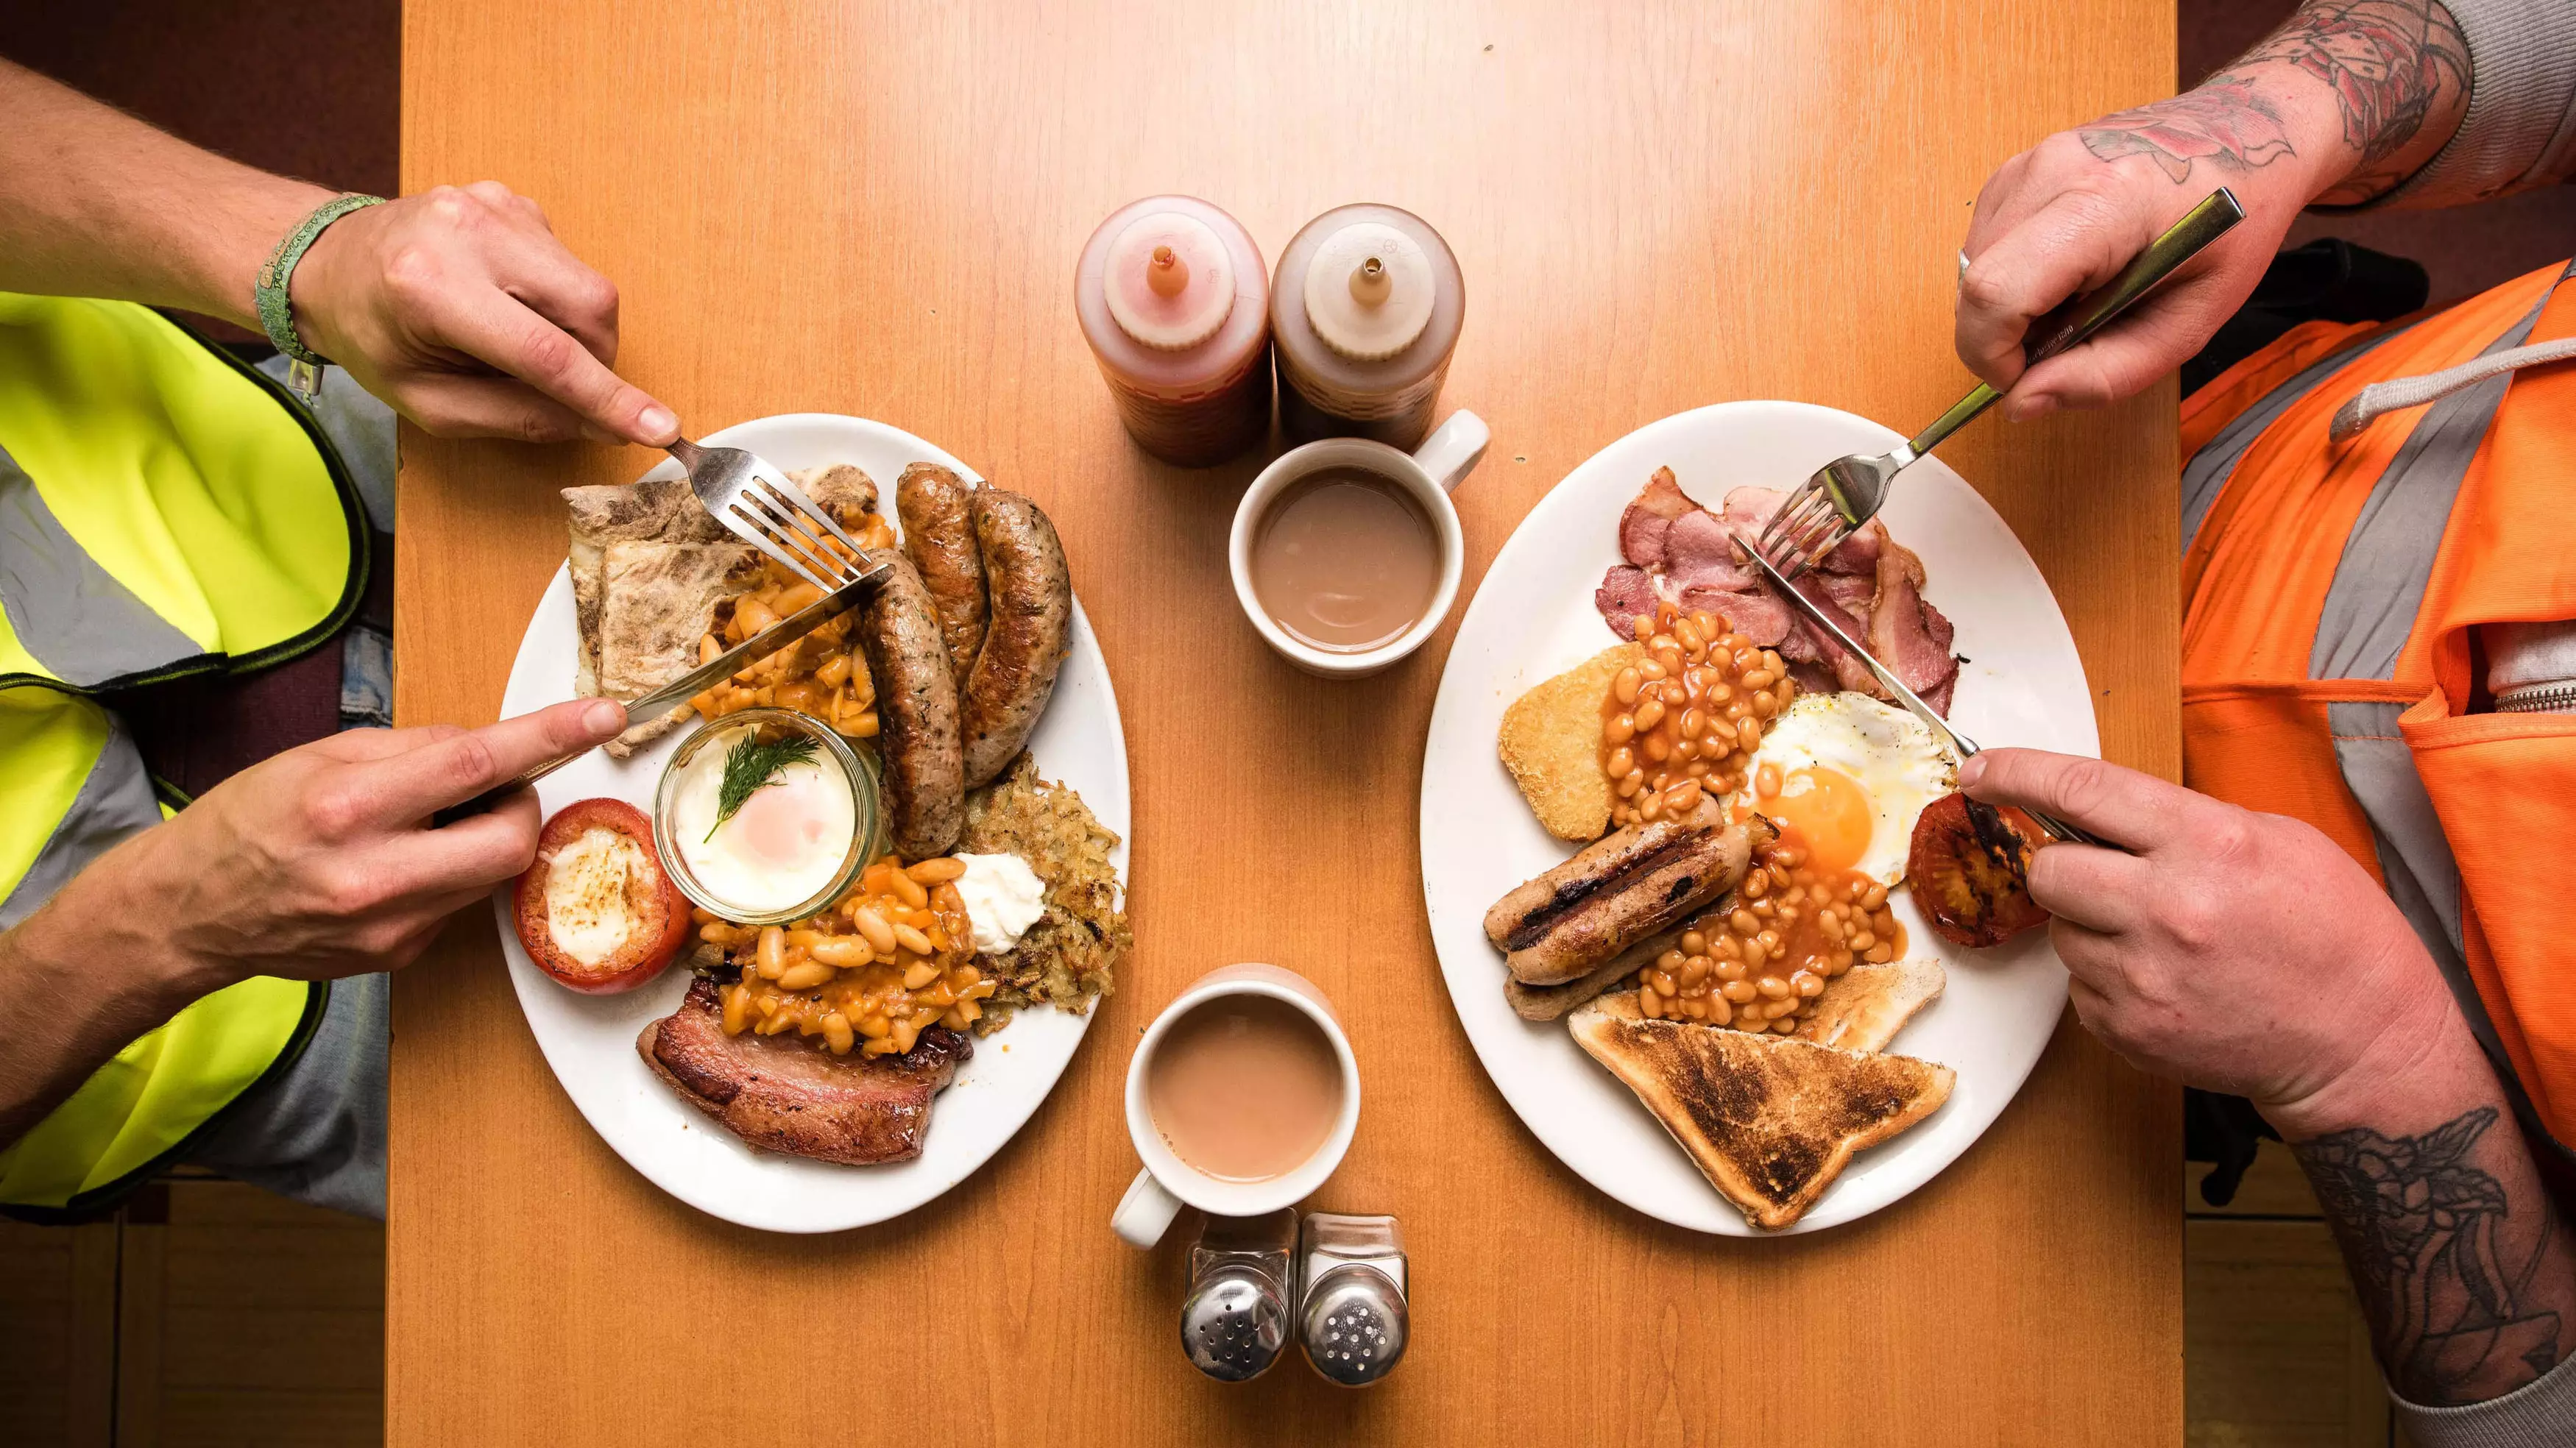 Welsh Cops Face Backlash From Vegans Over Picture Of English Breakfast 